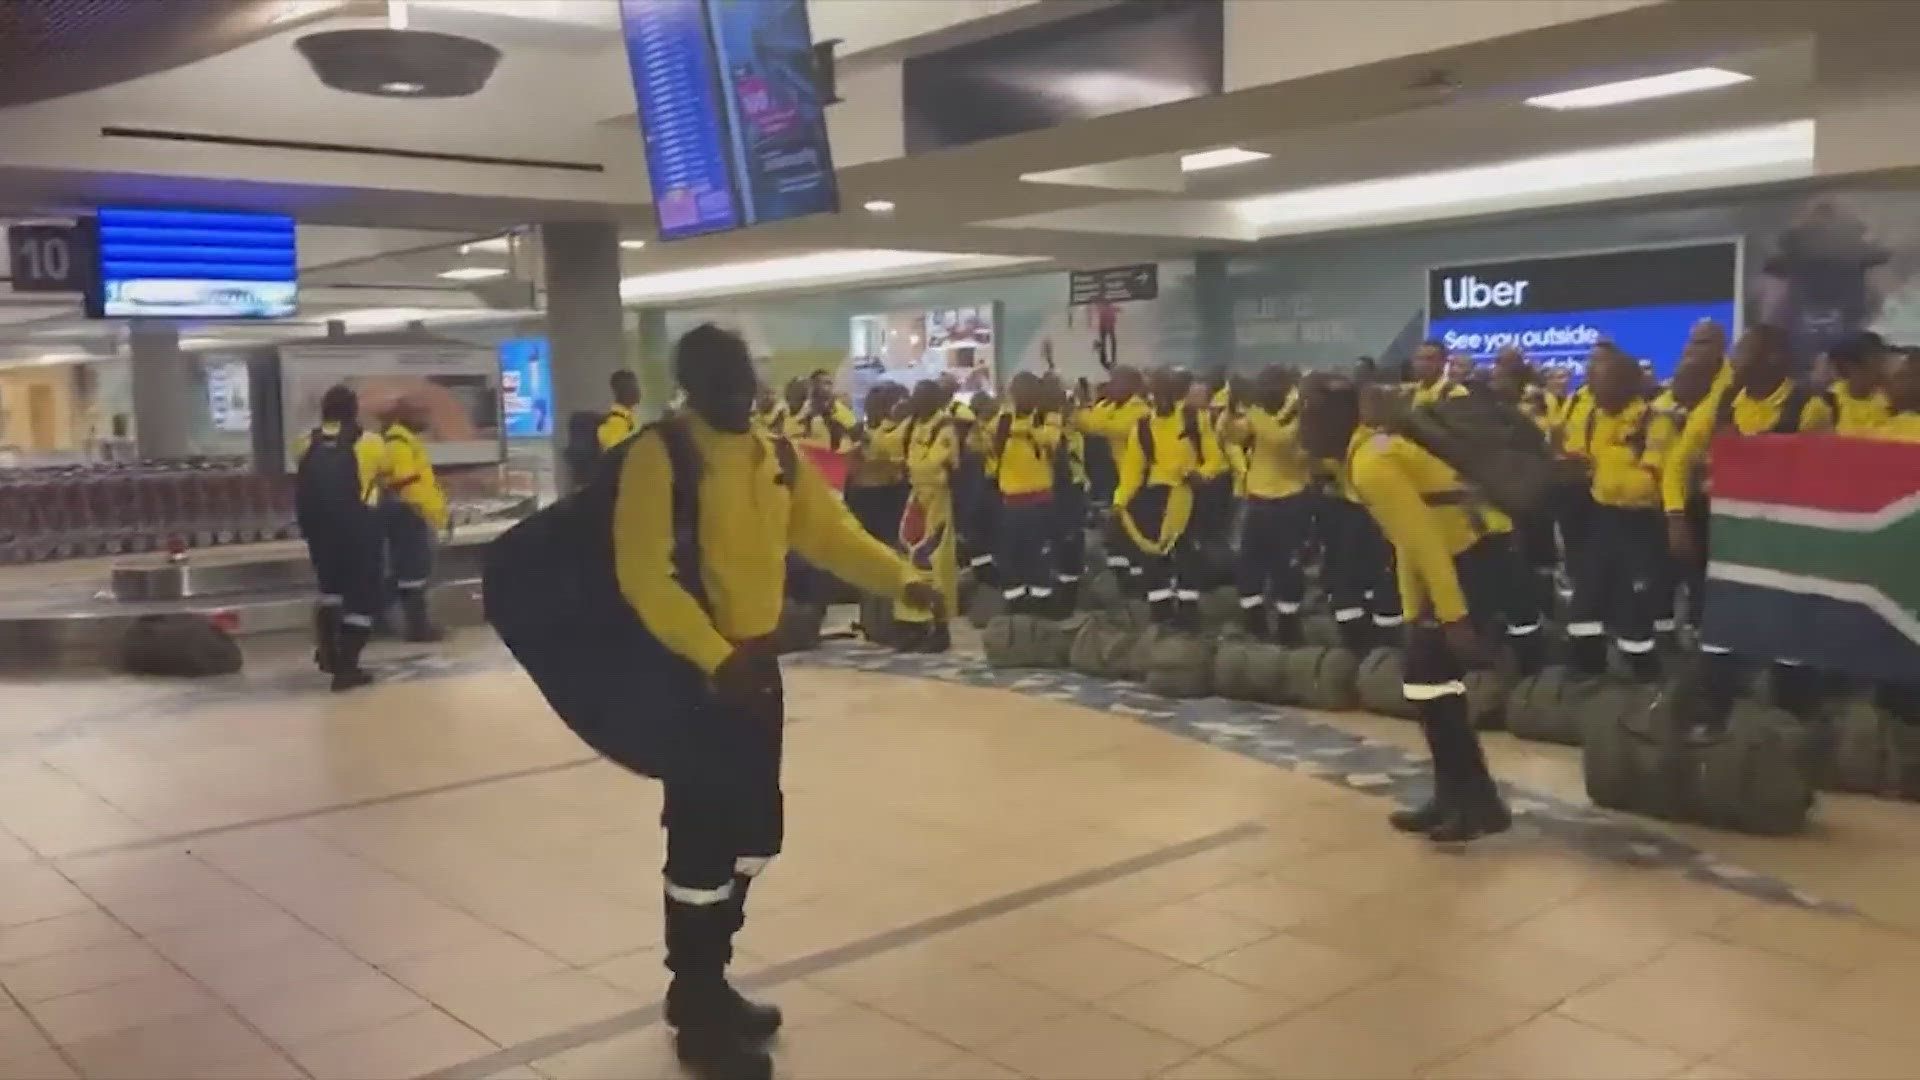 The firefighters performed a traditional song and dance upon their arrival at the Edmonton airport.